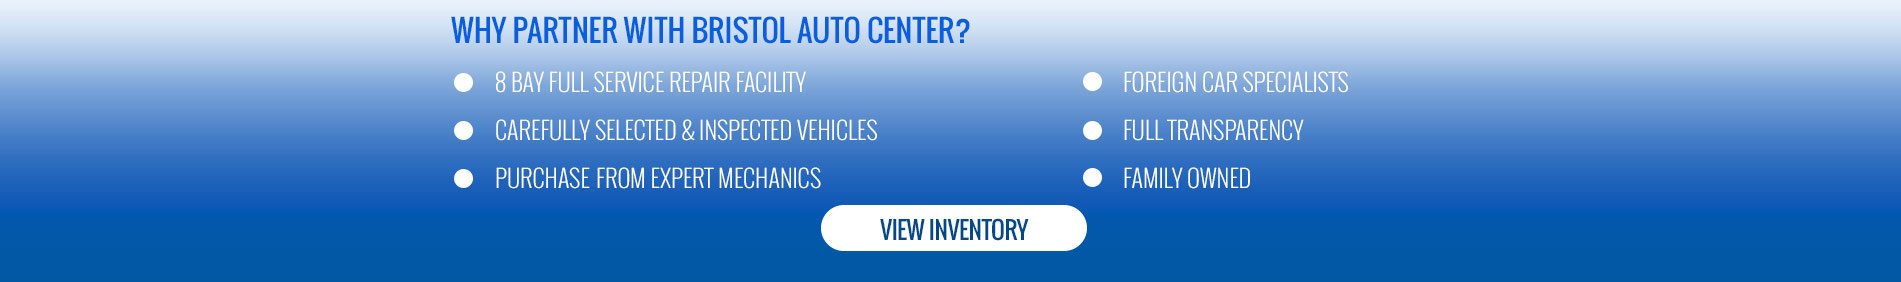 Why Partner With Bristol Auto Center?